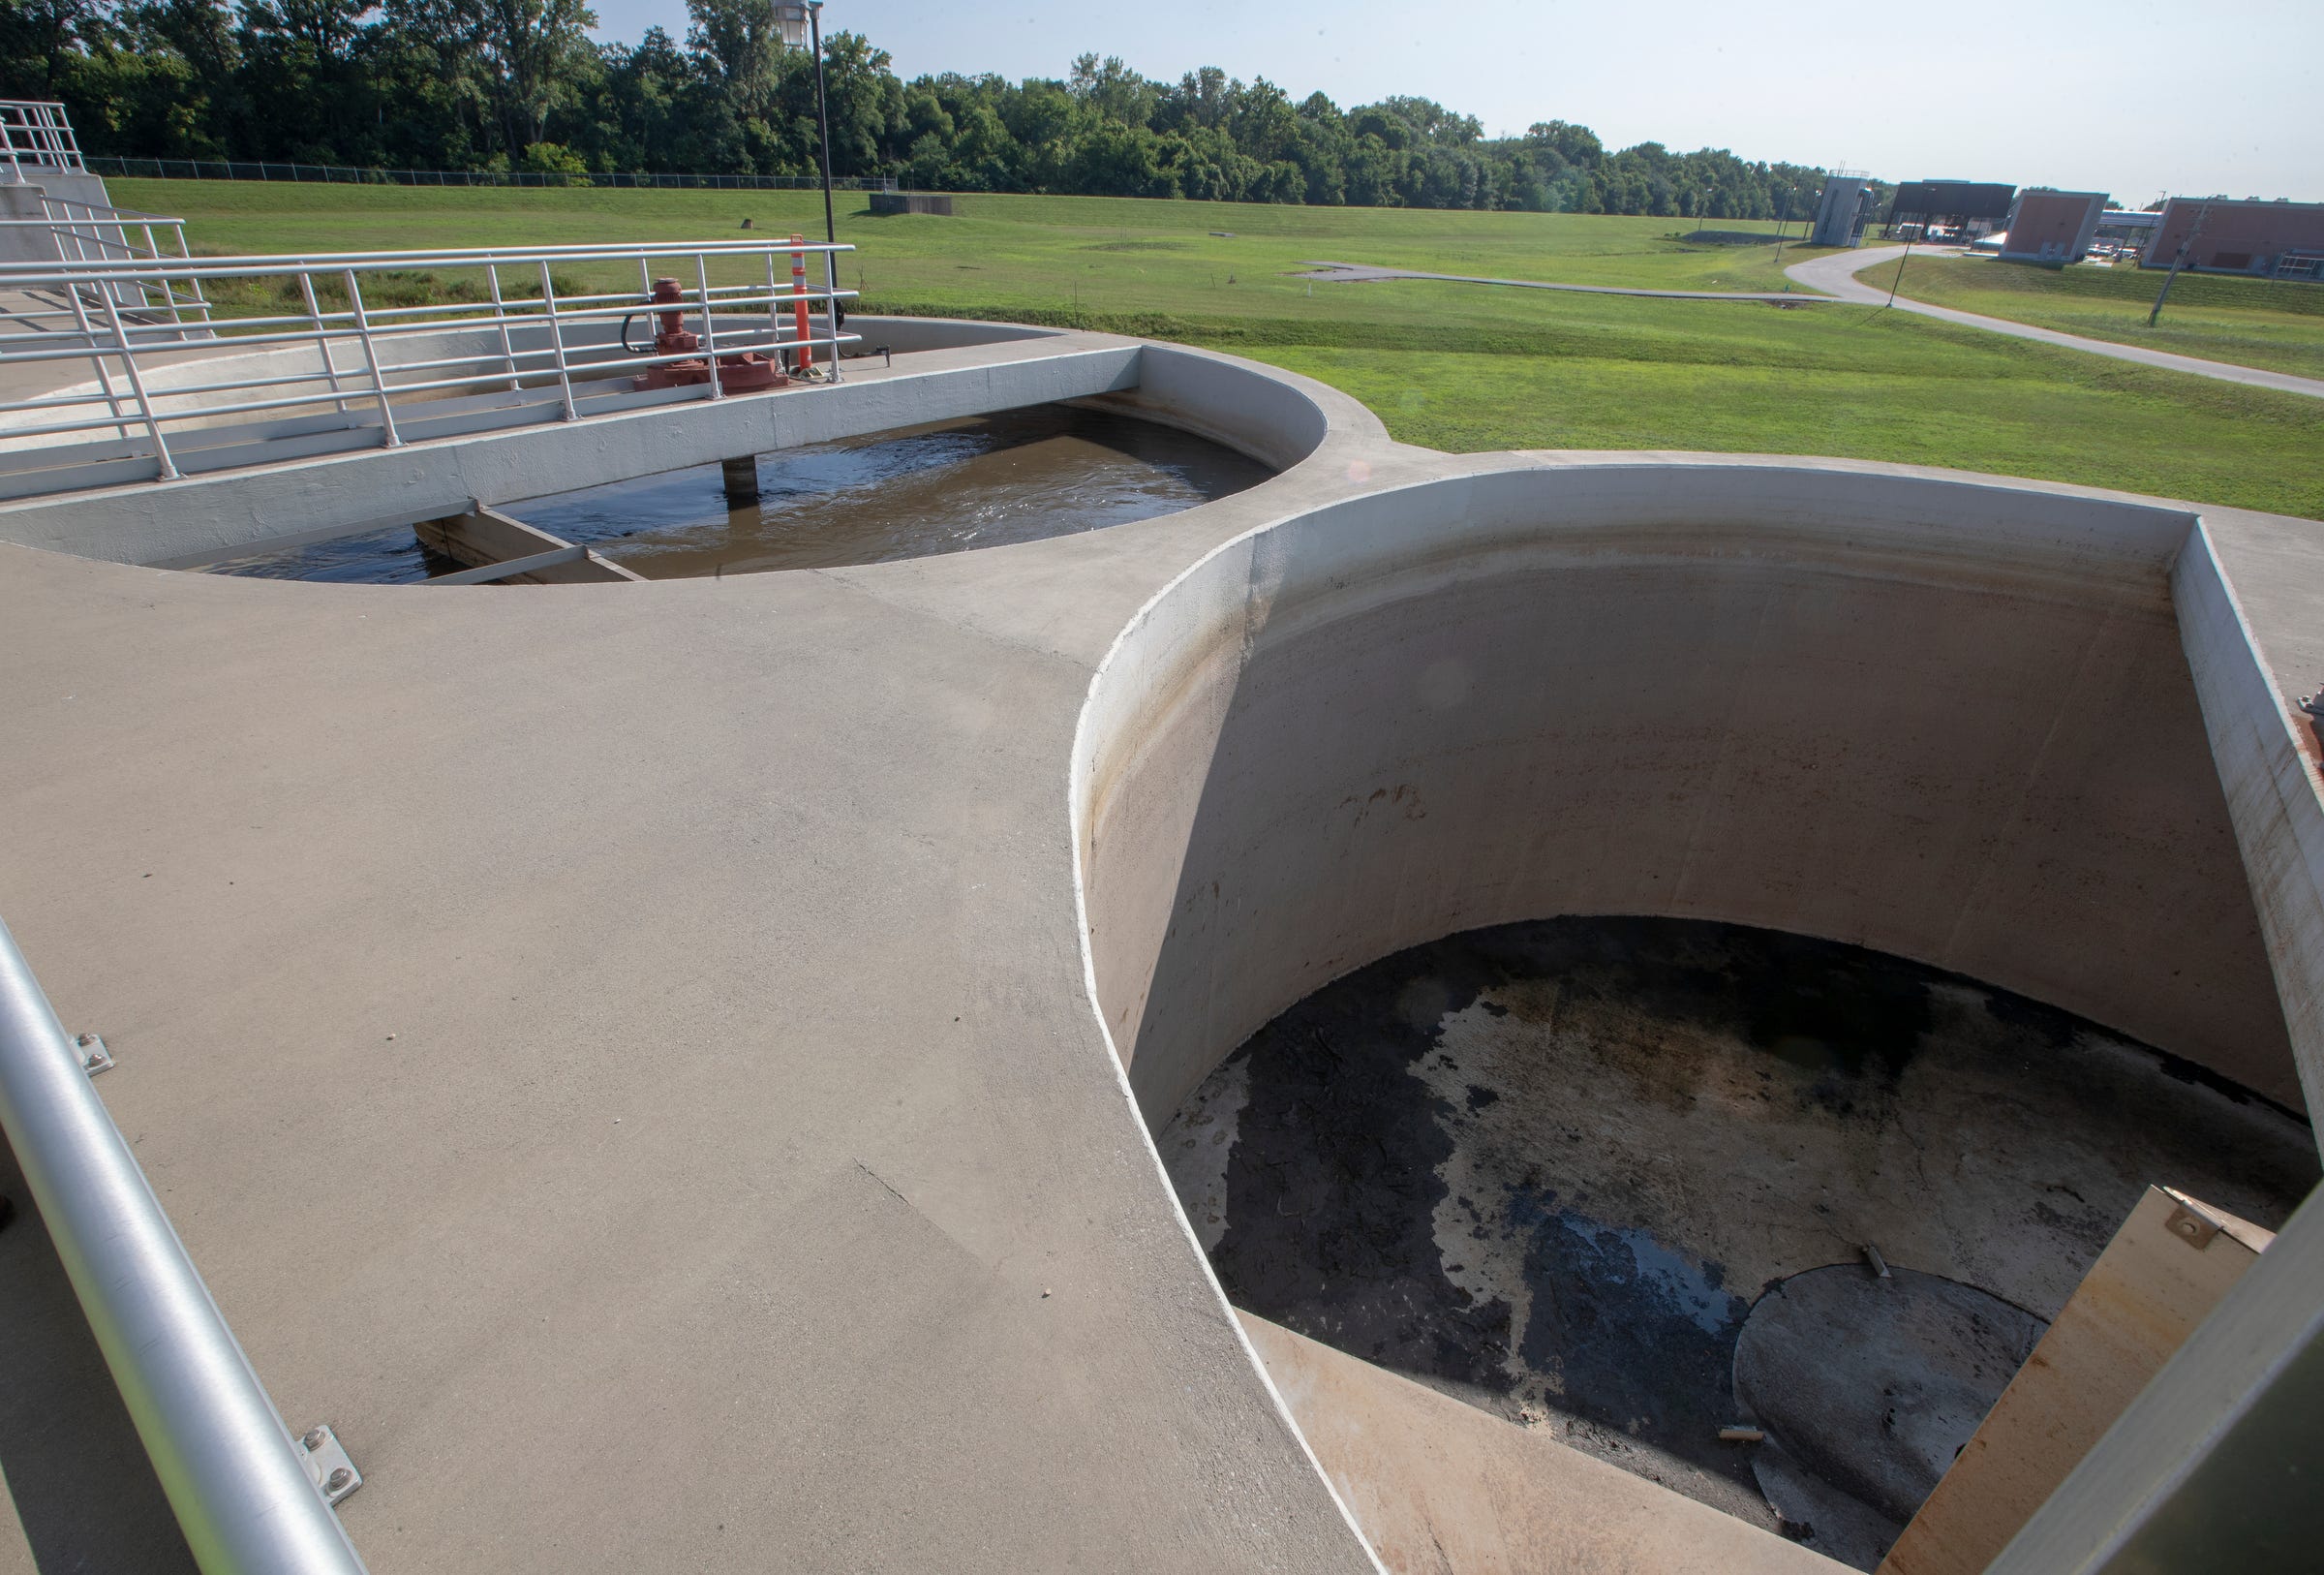 Treatment ponds, designed to filter out sediment, operate at the Southport Advanced Wastewater Treatment Plant in Indianapolis on Tuesday, July 23, 2019. This plant processes sewage captured in the Dig Indy tunnels, which will continue to come online through 2025.